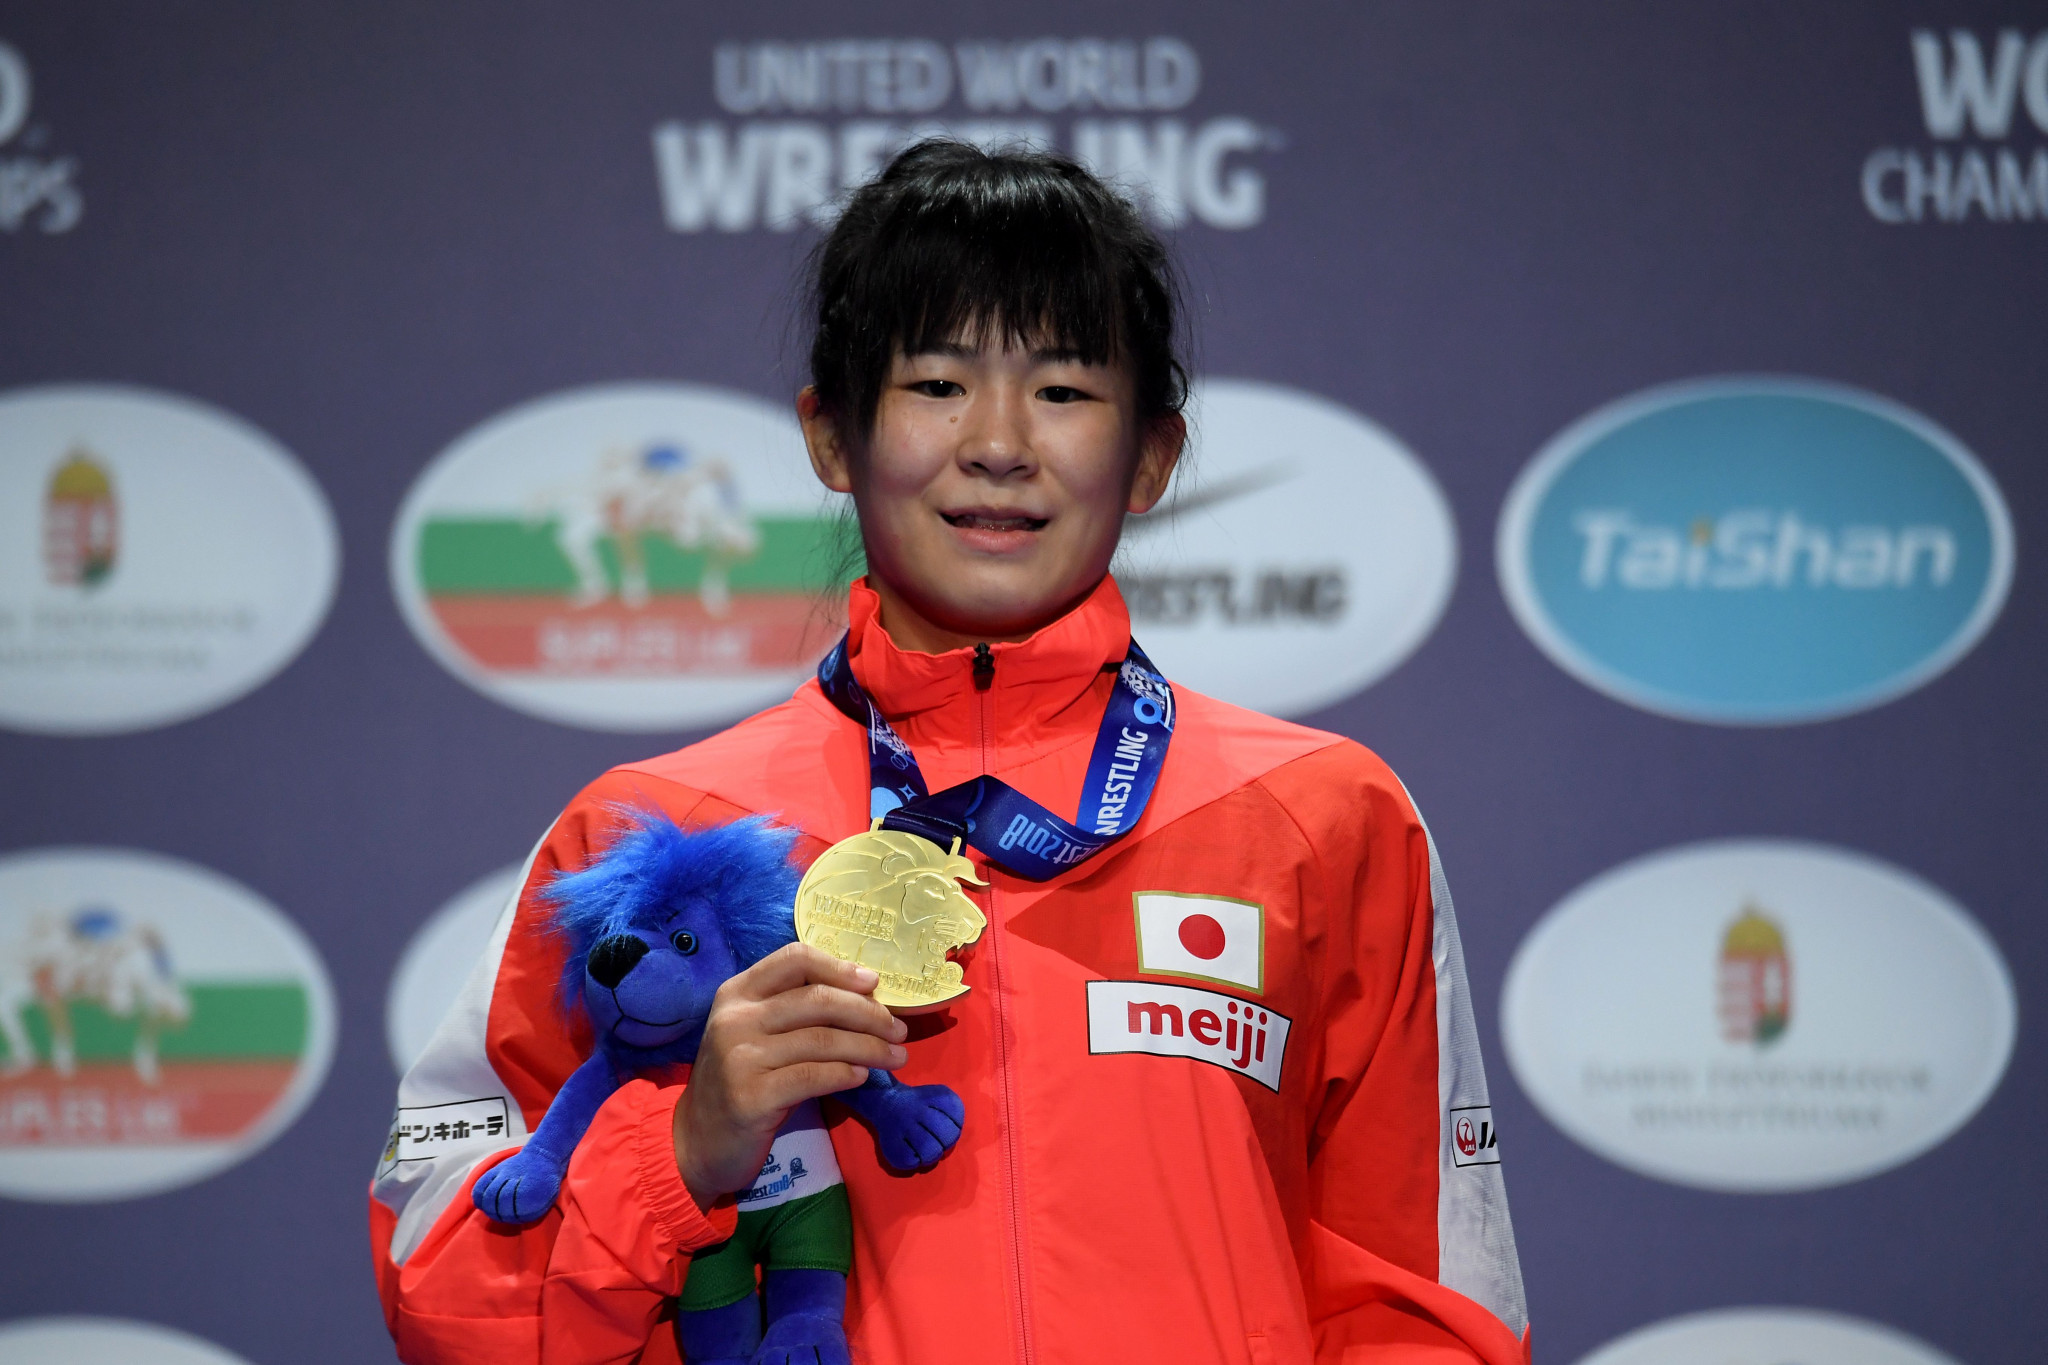 Japan has proved to be the dominant nation in women's wrestling ©Getty Images